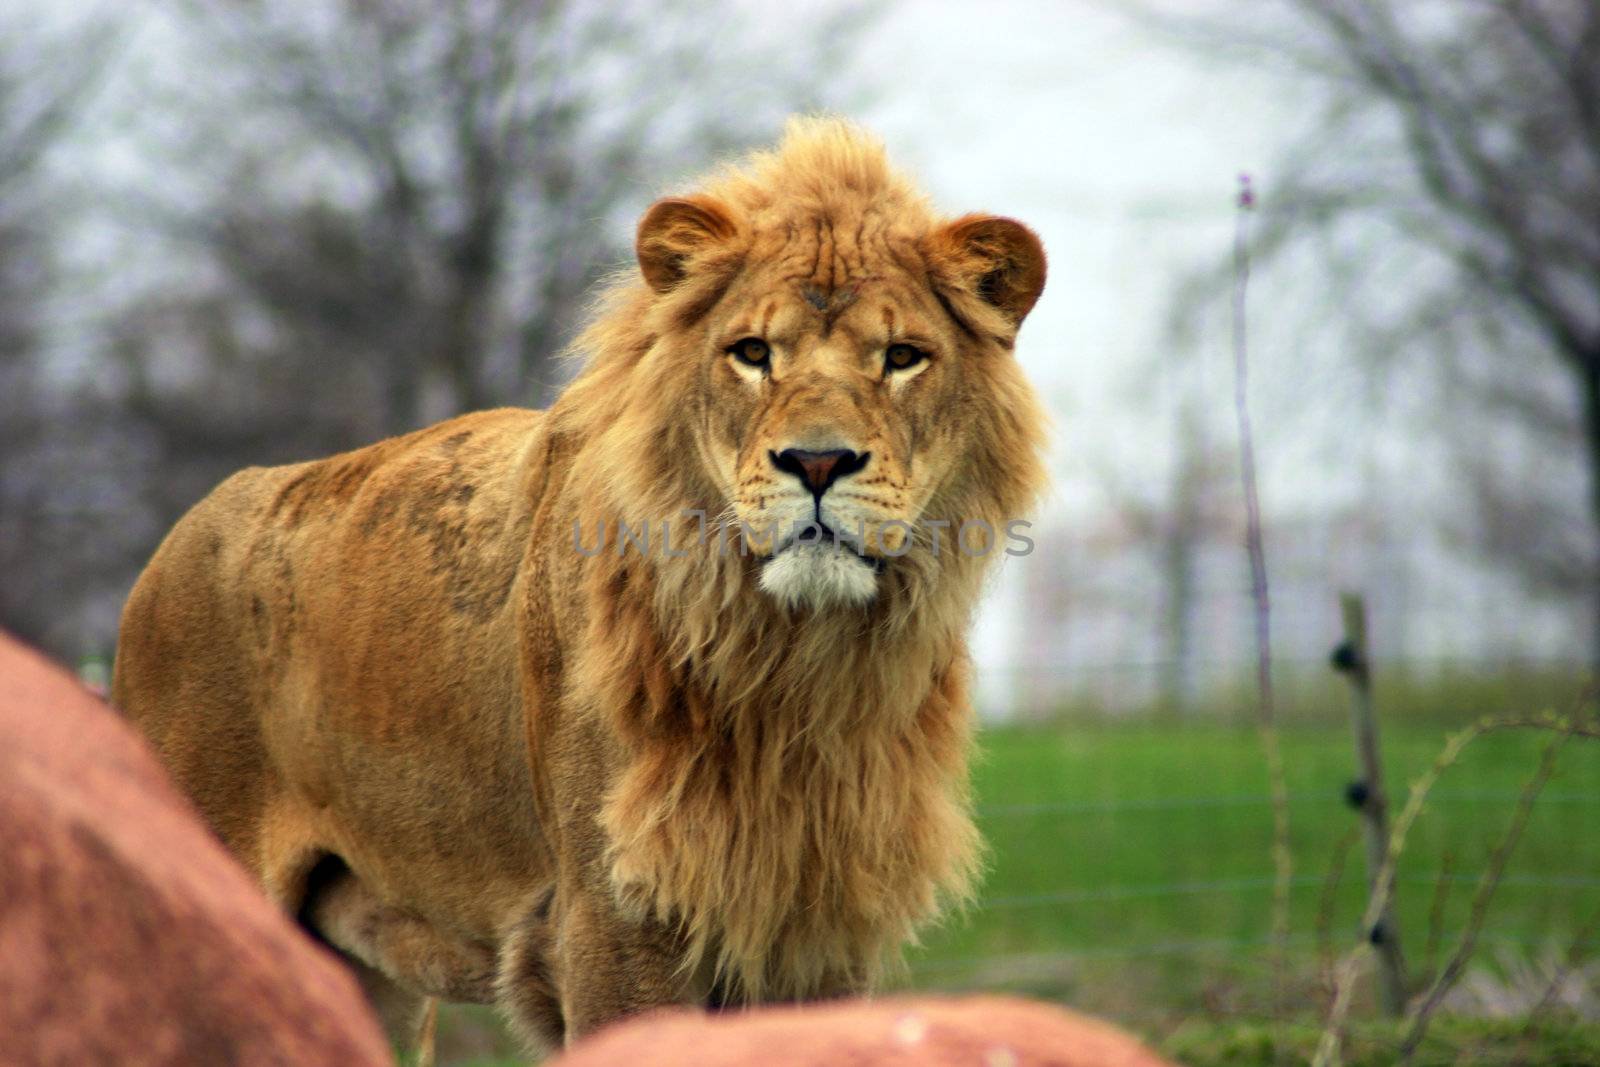 Large male lion with full mane and patchy fur